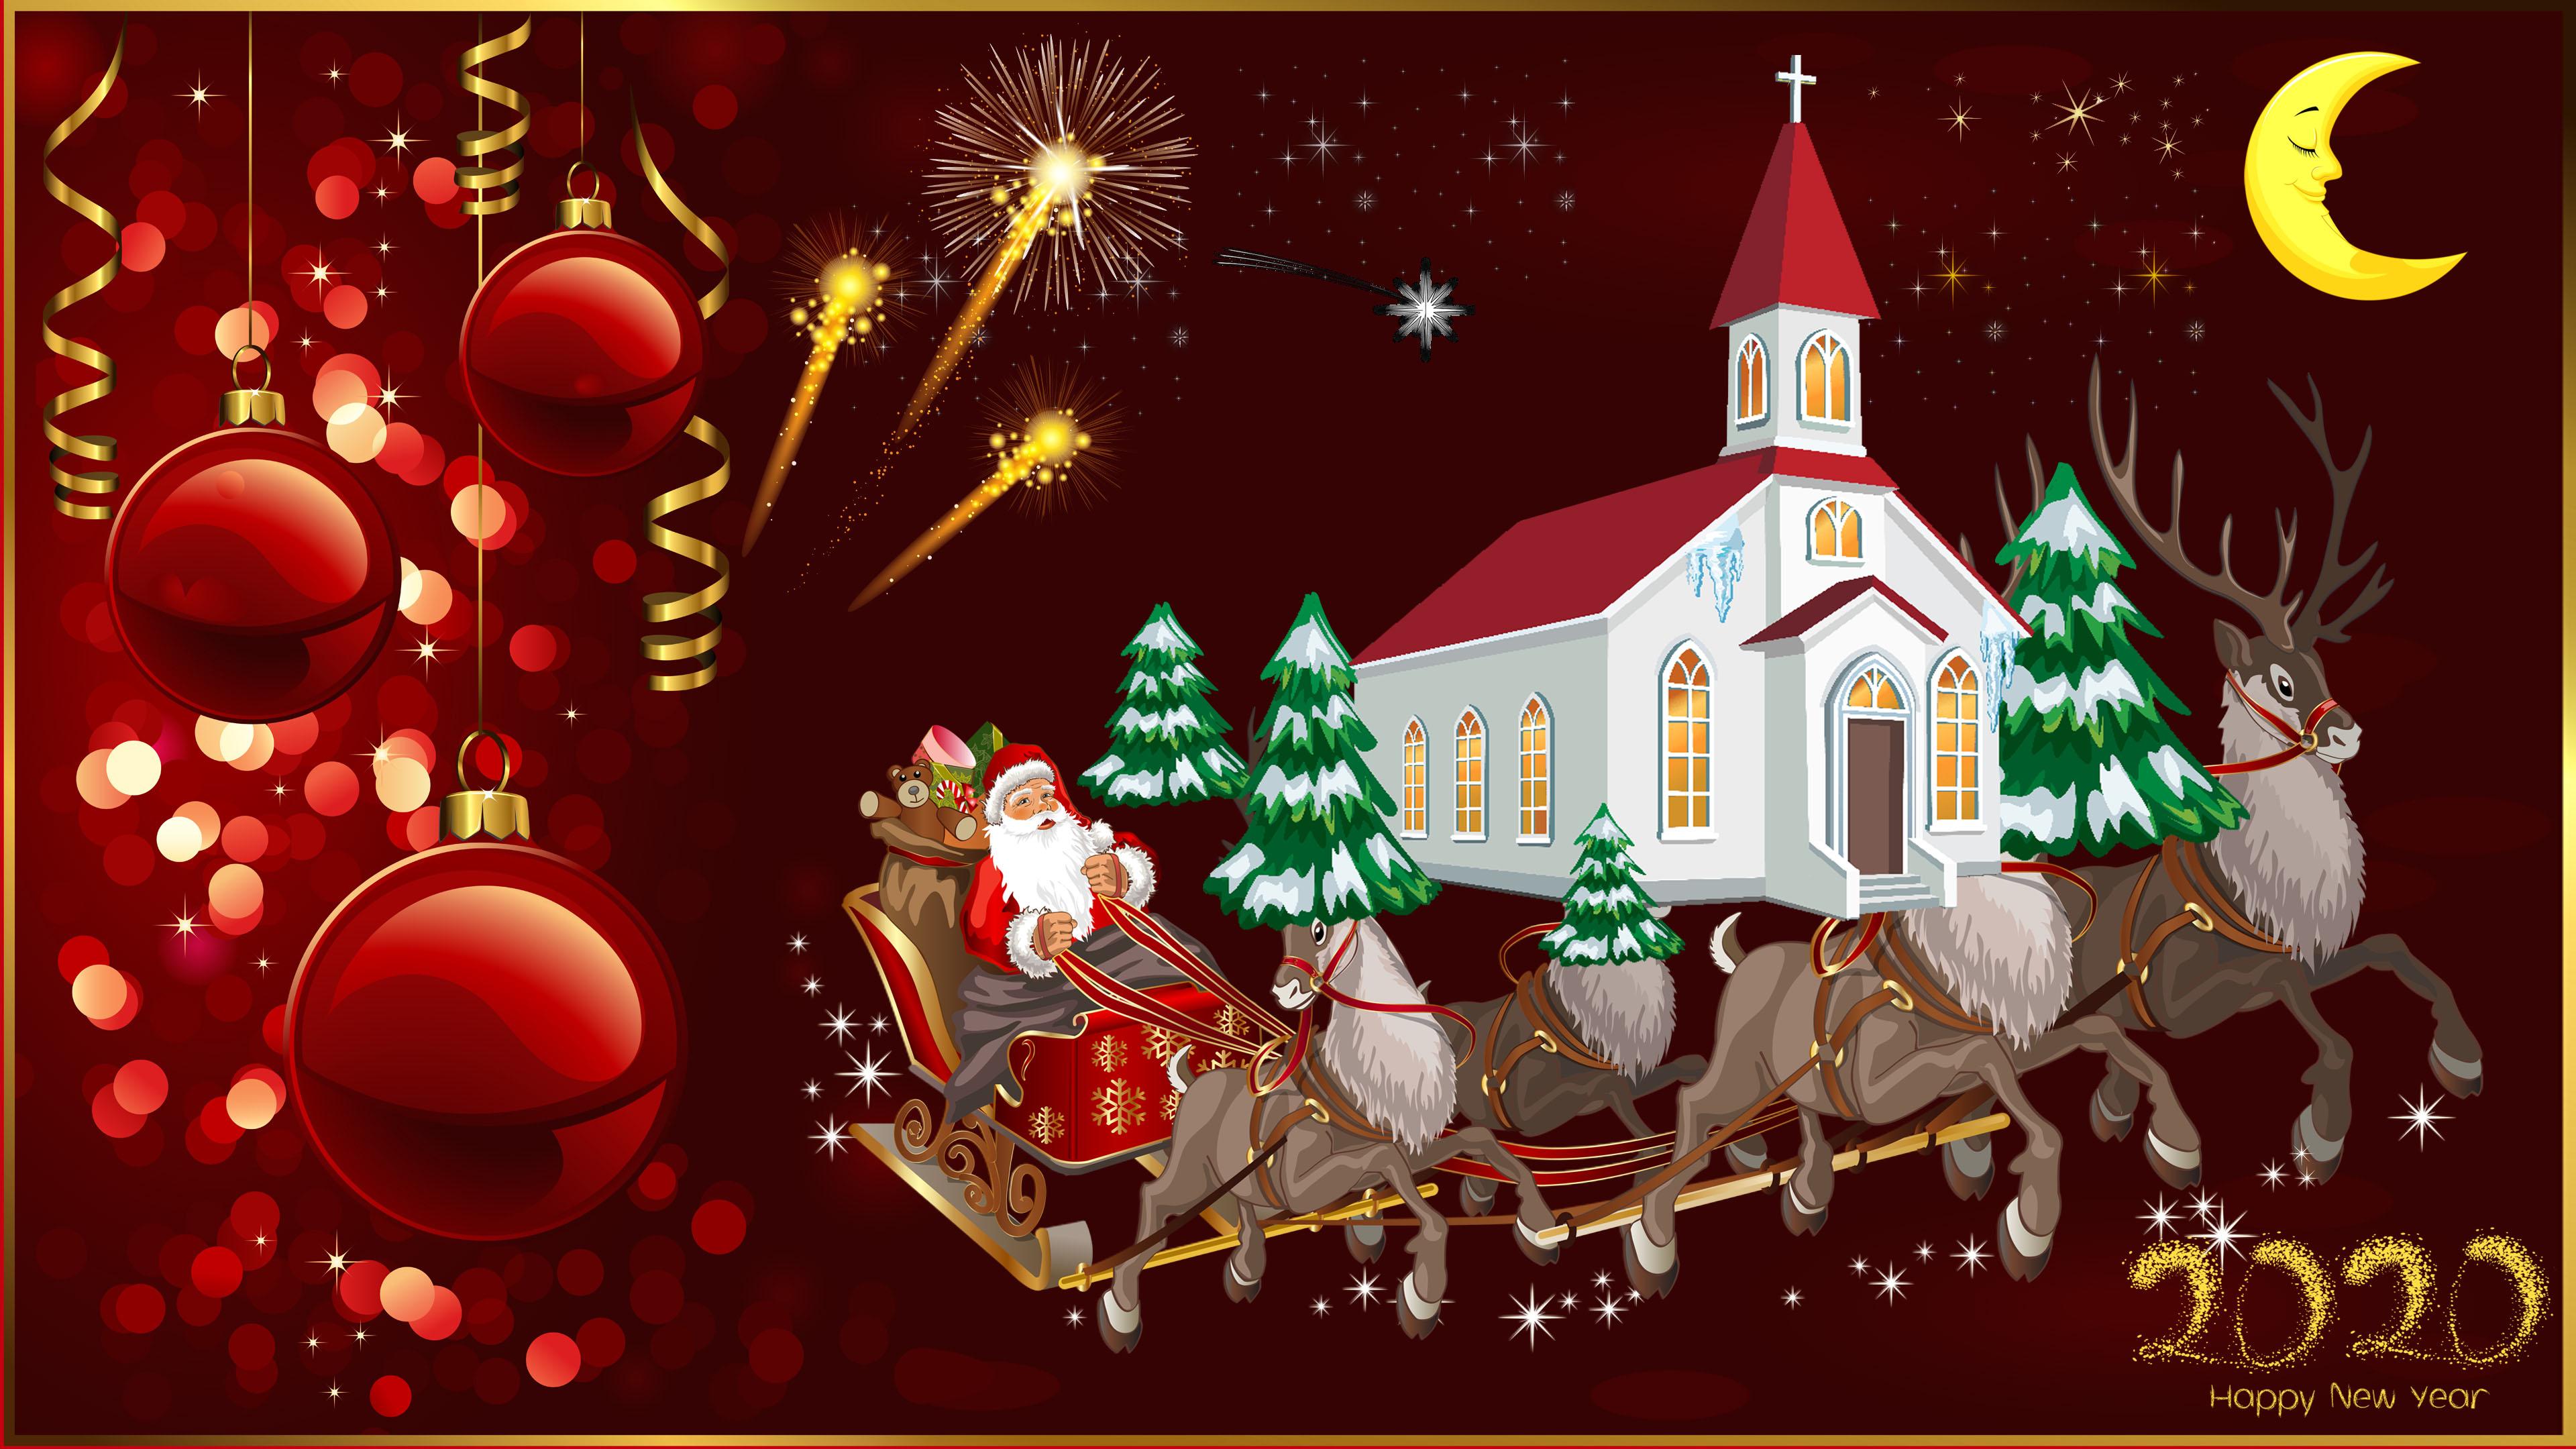 Happy New Year 2020 Merry Christmas Christmas Greeting Card